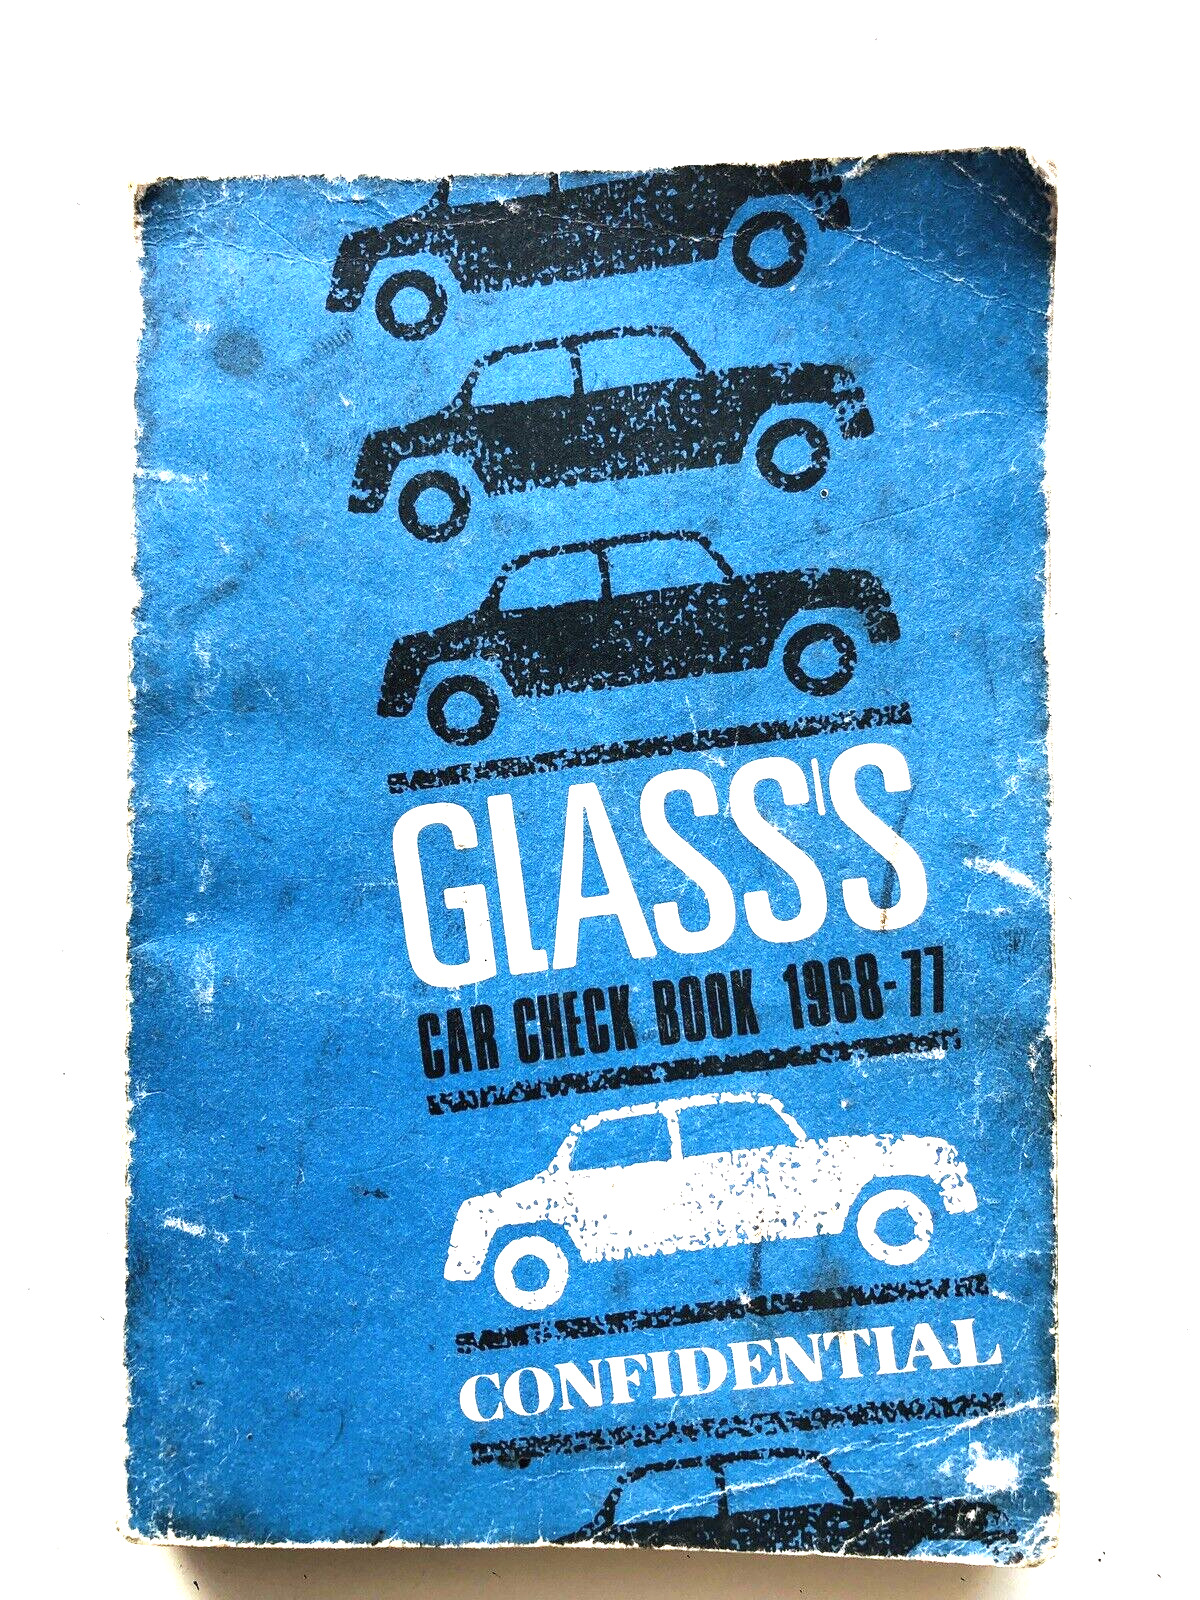 GLASS\'S GUIDE CLASSIC CAR CHECK BOOK 1968 - 1977 BMW FORD VW MG Audi Benz Alfa